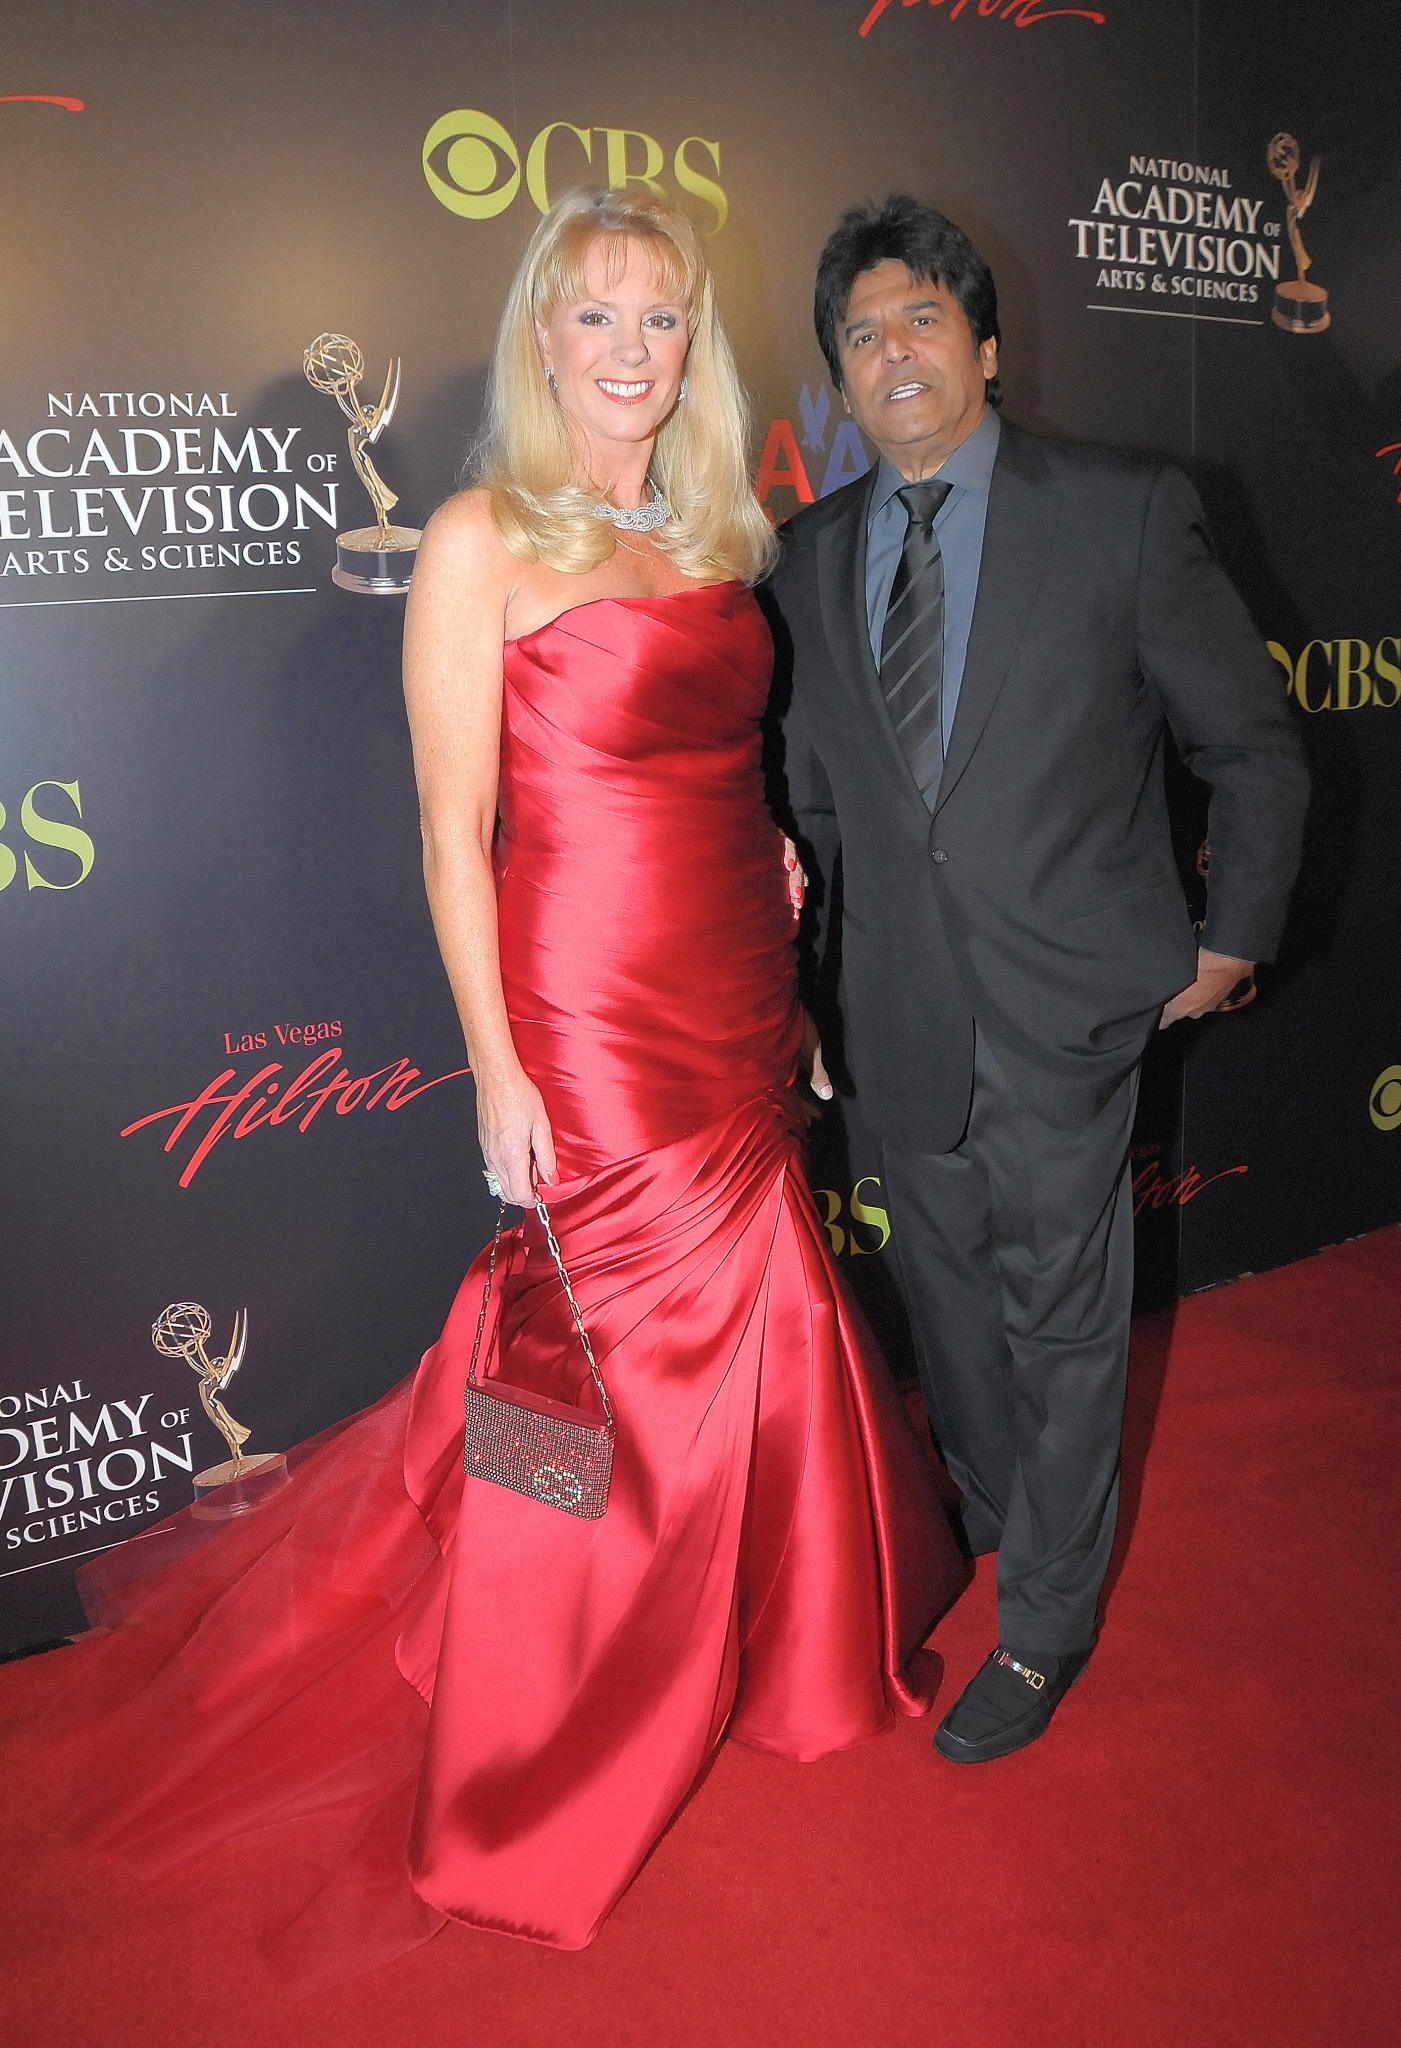 Co-hosts of World's Funniest Moments, Laura McKenzie and Erik Estrada at the 2010 Daytime Emmy Awards.